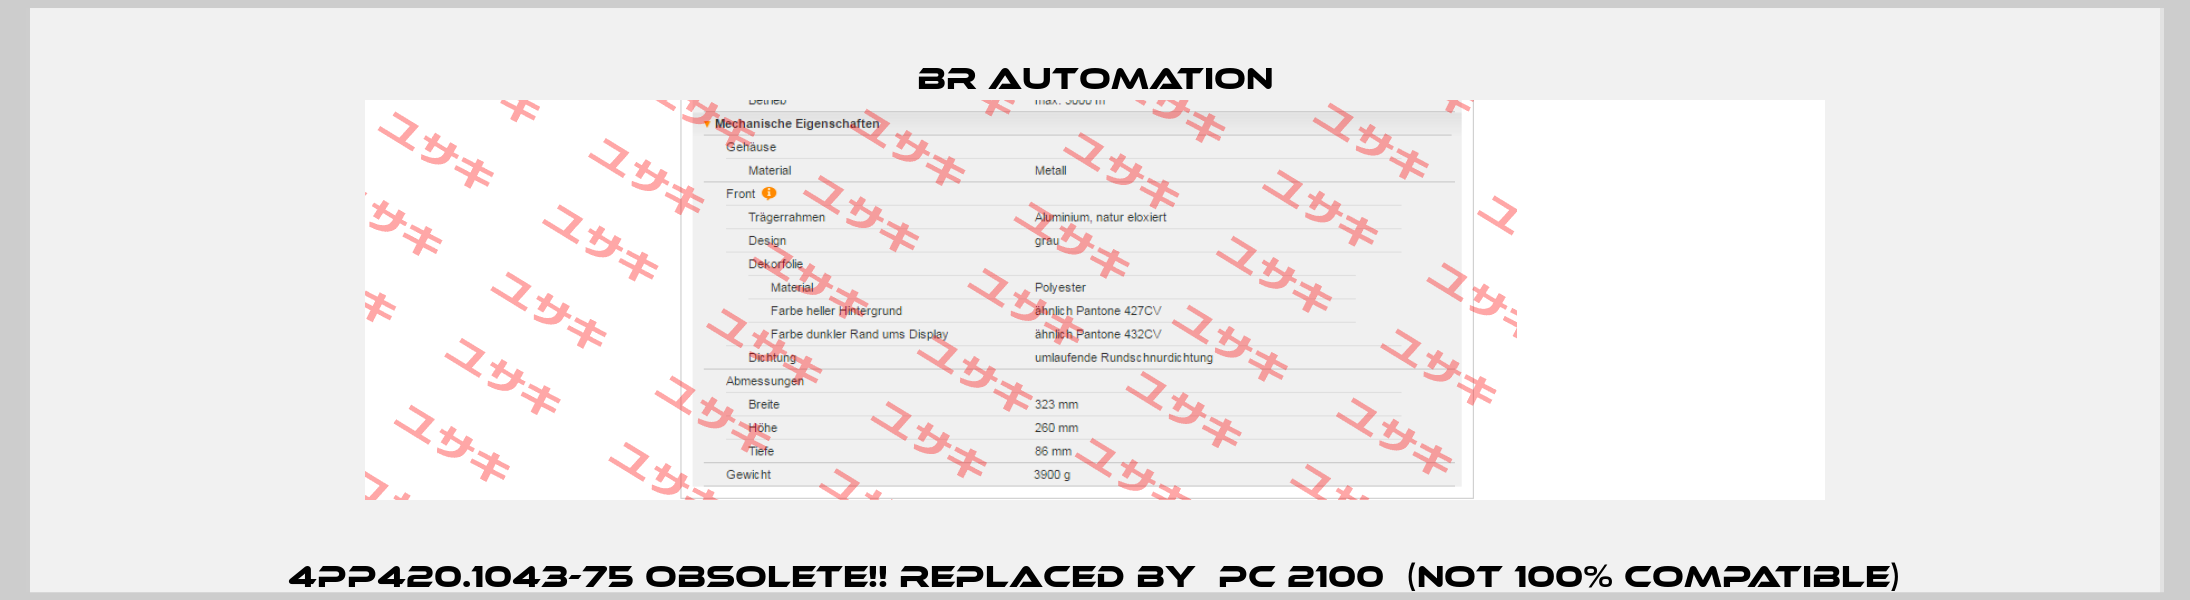 4PP420.1043-75 Obsolete!! Replaced by  PC 2100  (not 100% compatible) Br Automation